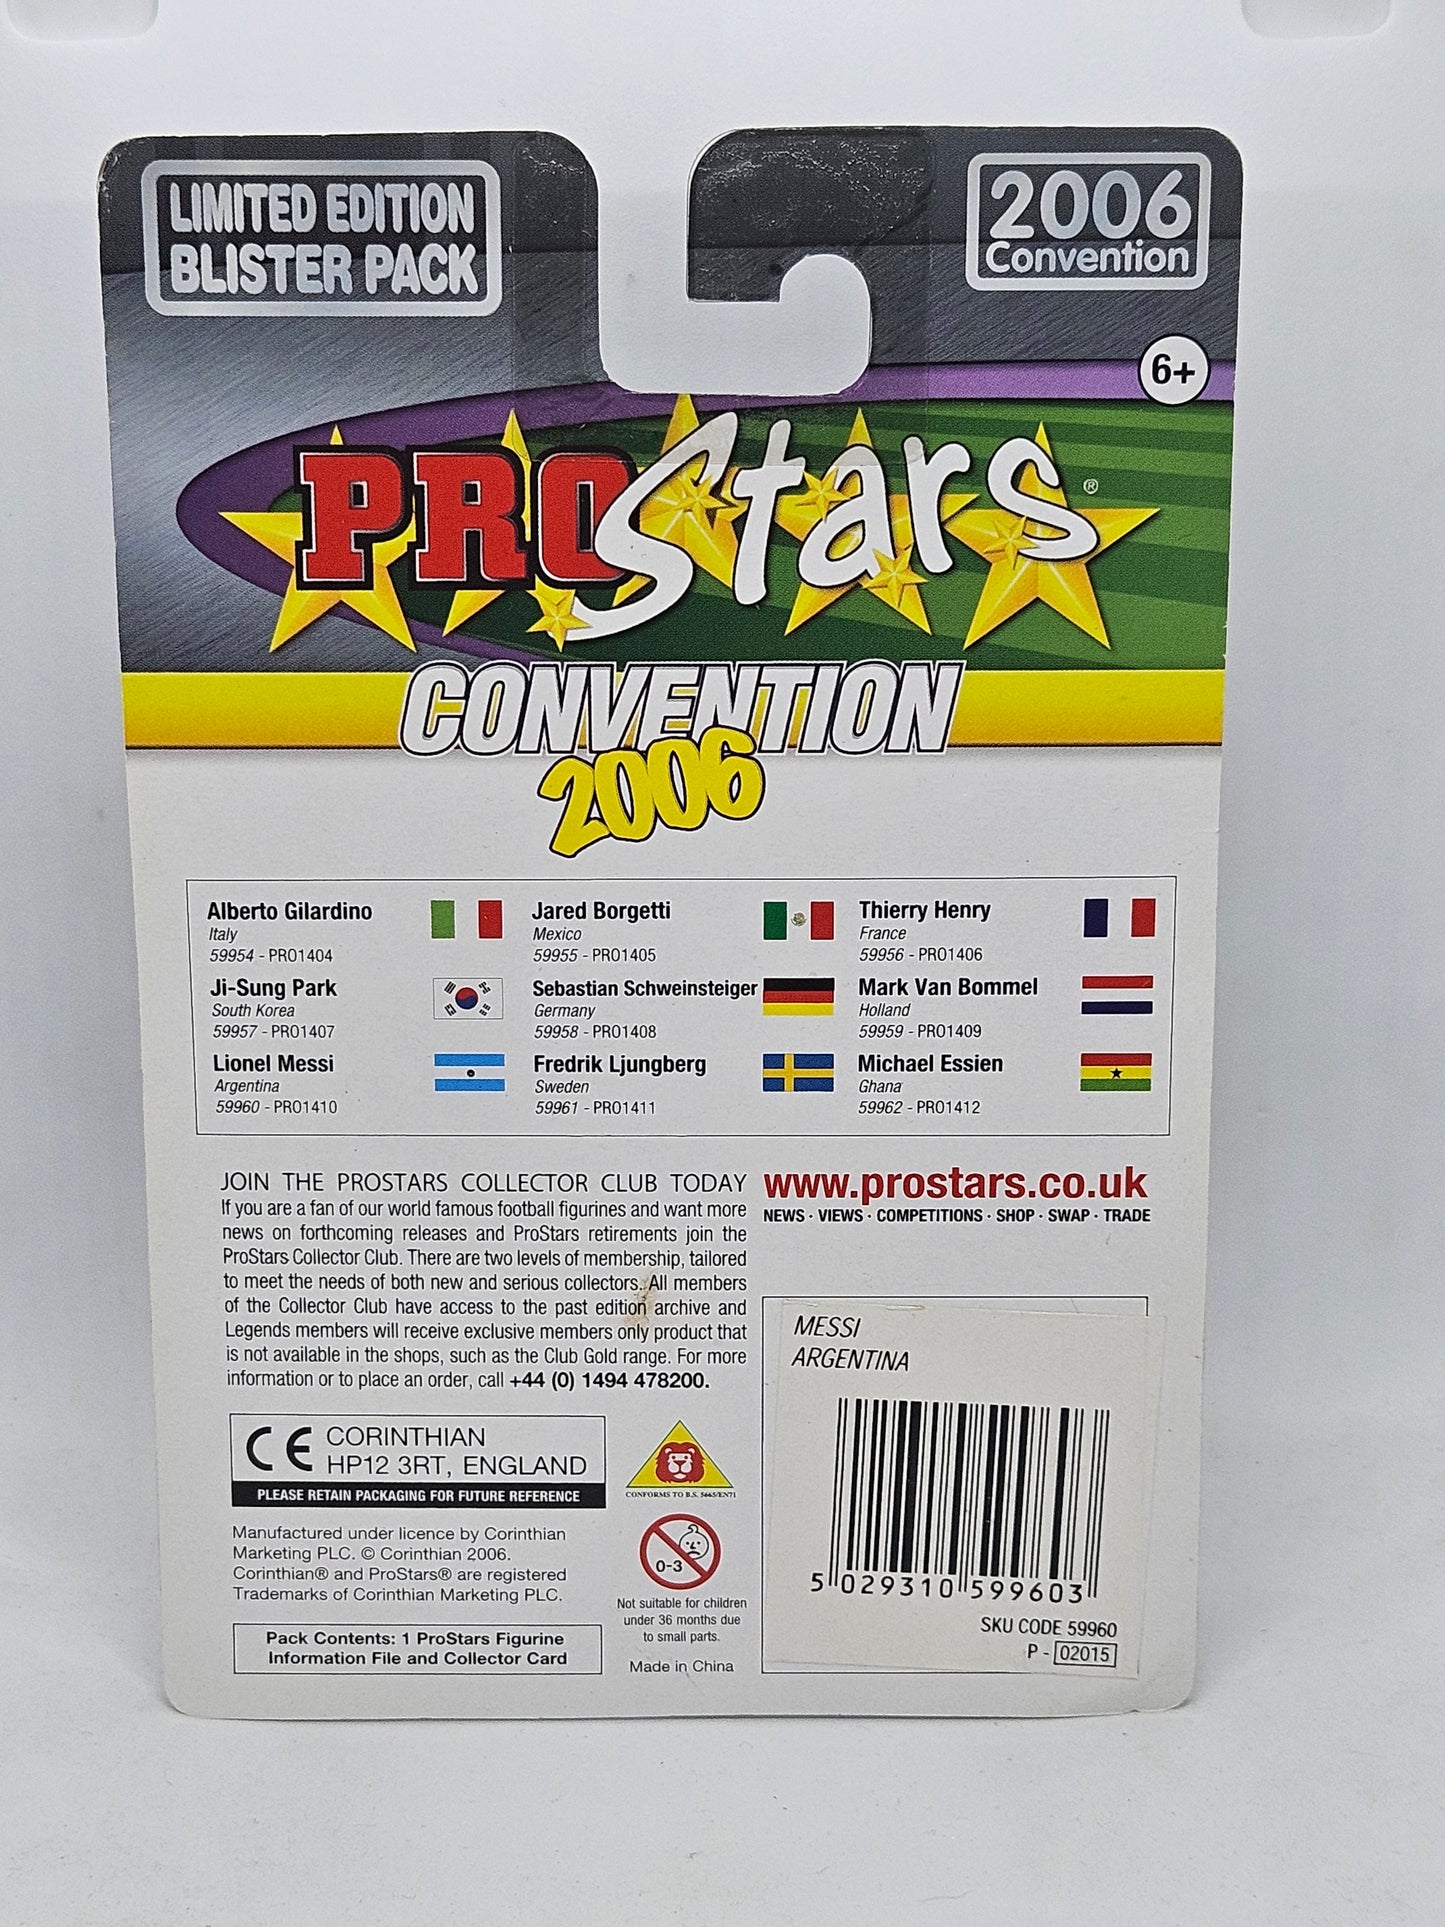 Lionel Messi (Argentina) Pro Stars Blister Pack Convention 2006 PRO1410